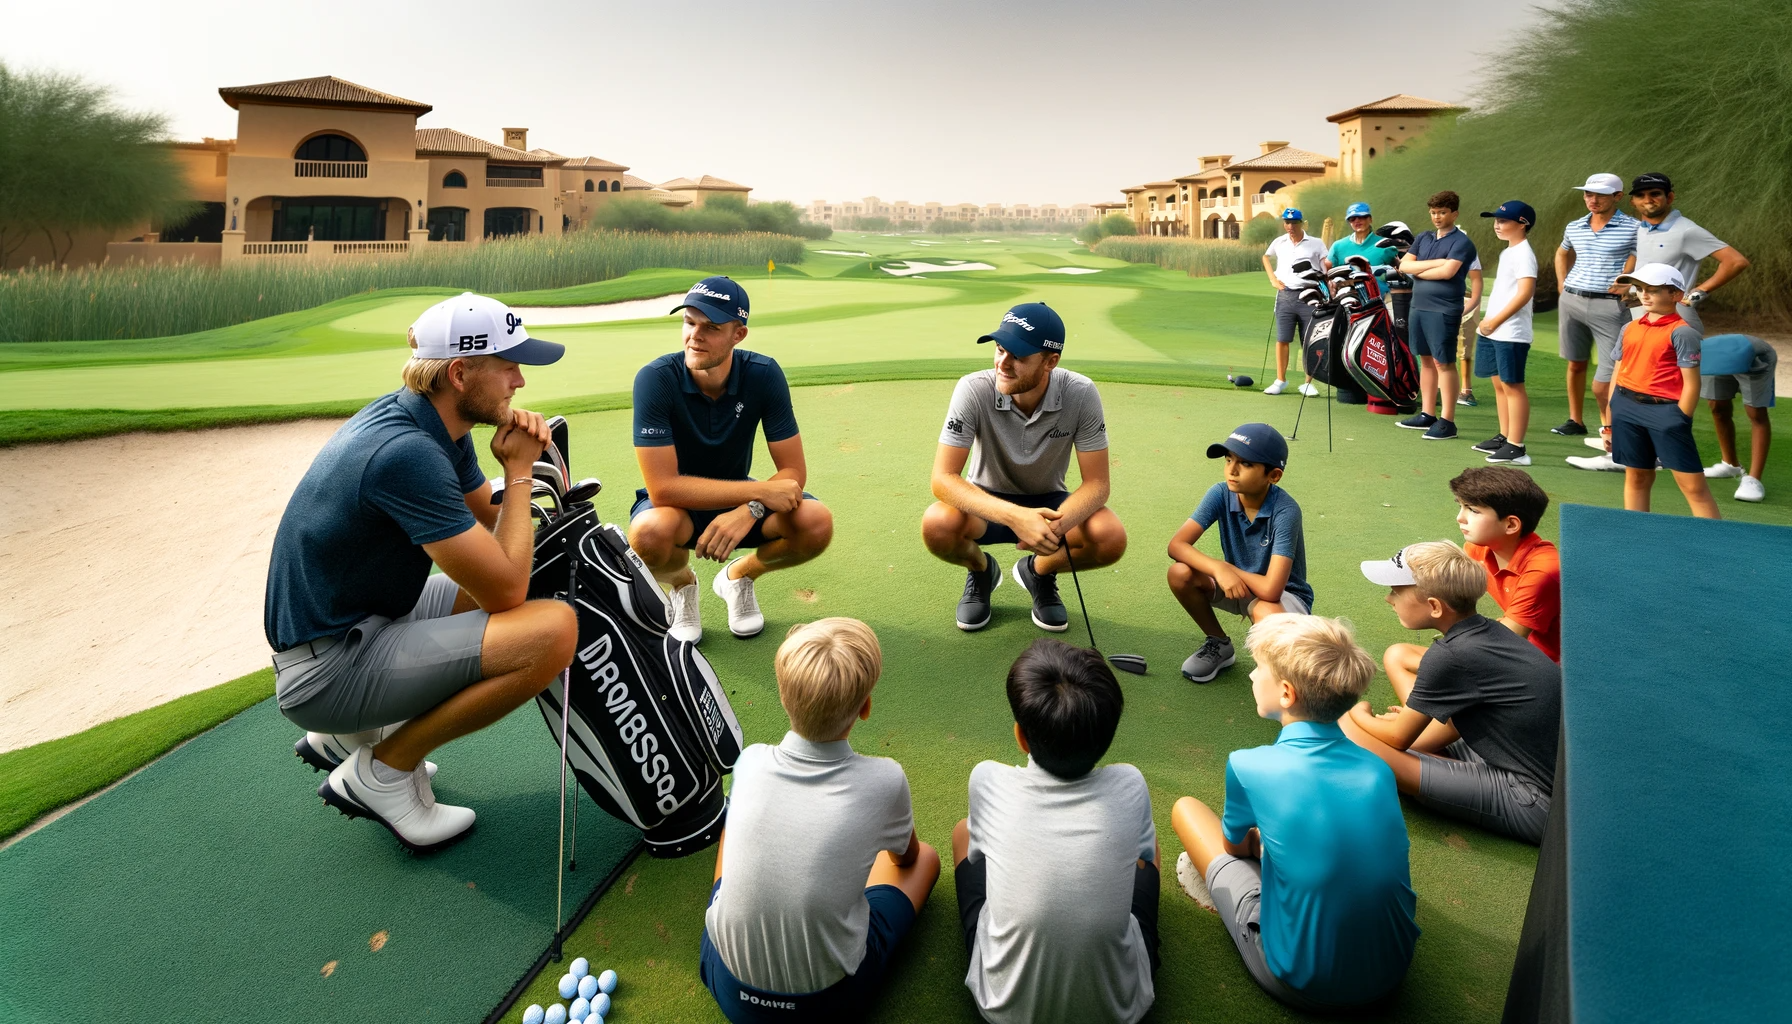 DALL·E 2024 01 10 16.30.00 An image of Danish golfers Thomas Bjorn Rasmus Hojgaard and Nicolai Hojgaard at a golf clinic interacting with young golfers. The setting is on a l